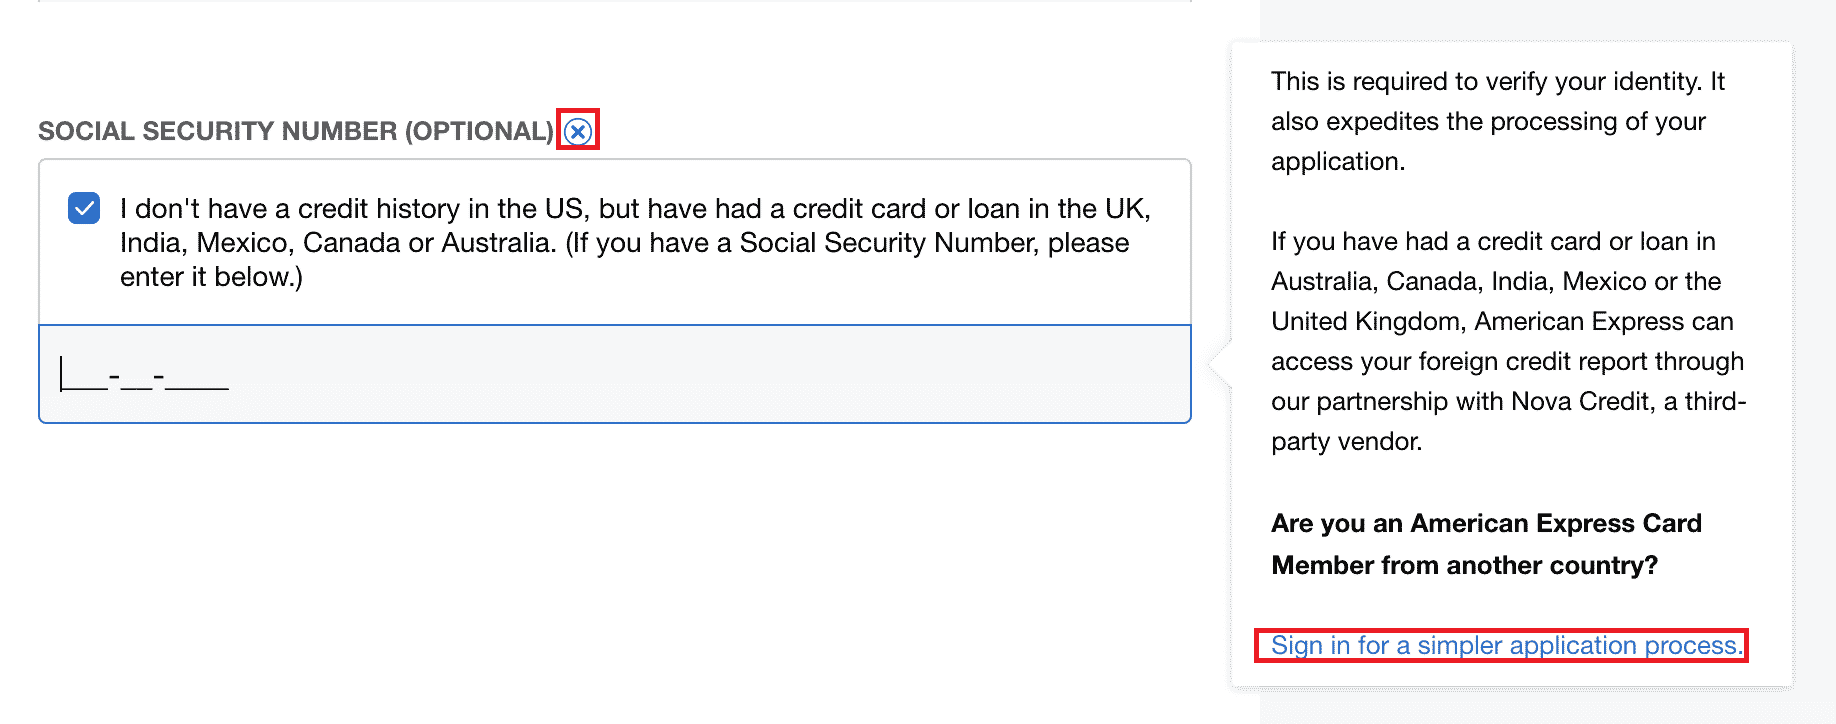 Amex social security number popup - sign in for simpler application process (Amex Global Transfer)